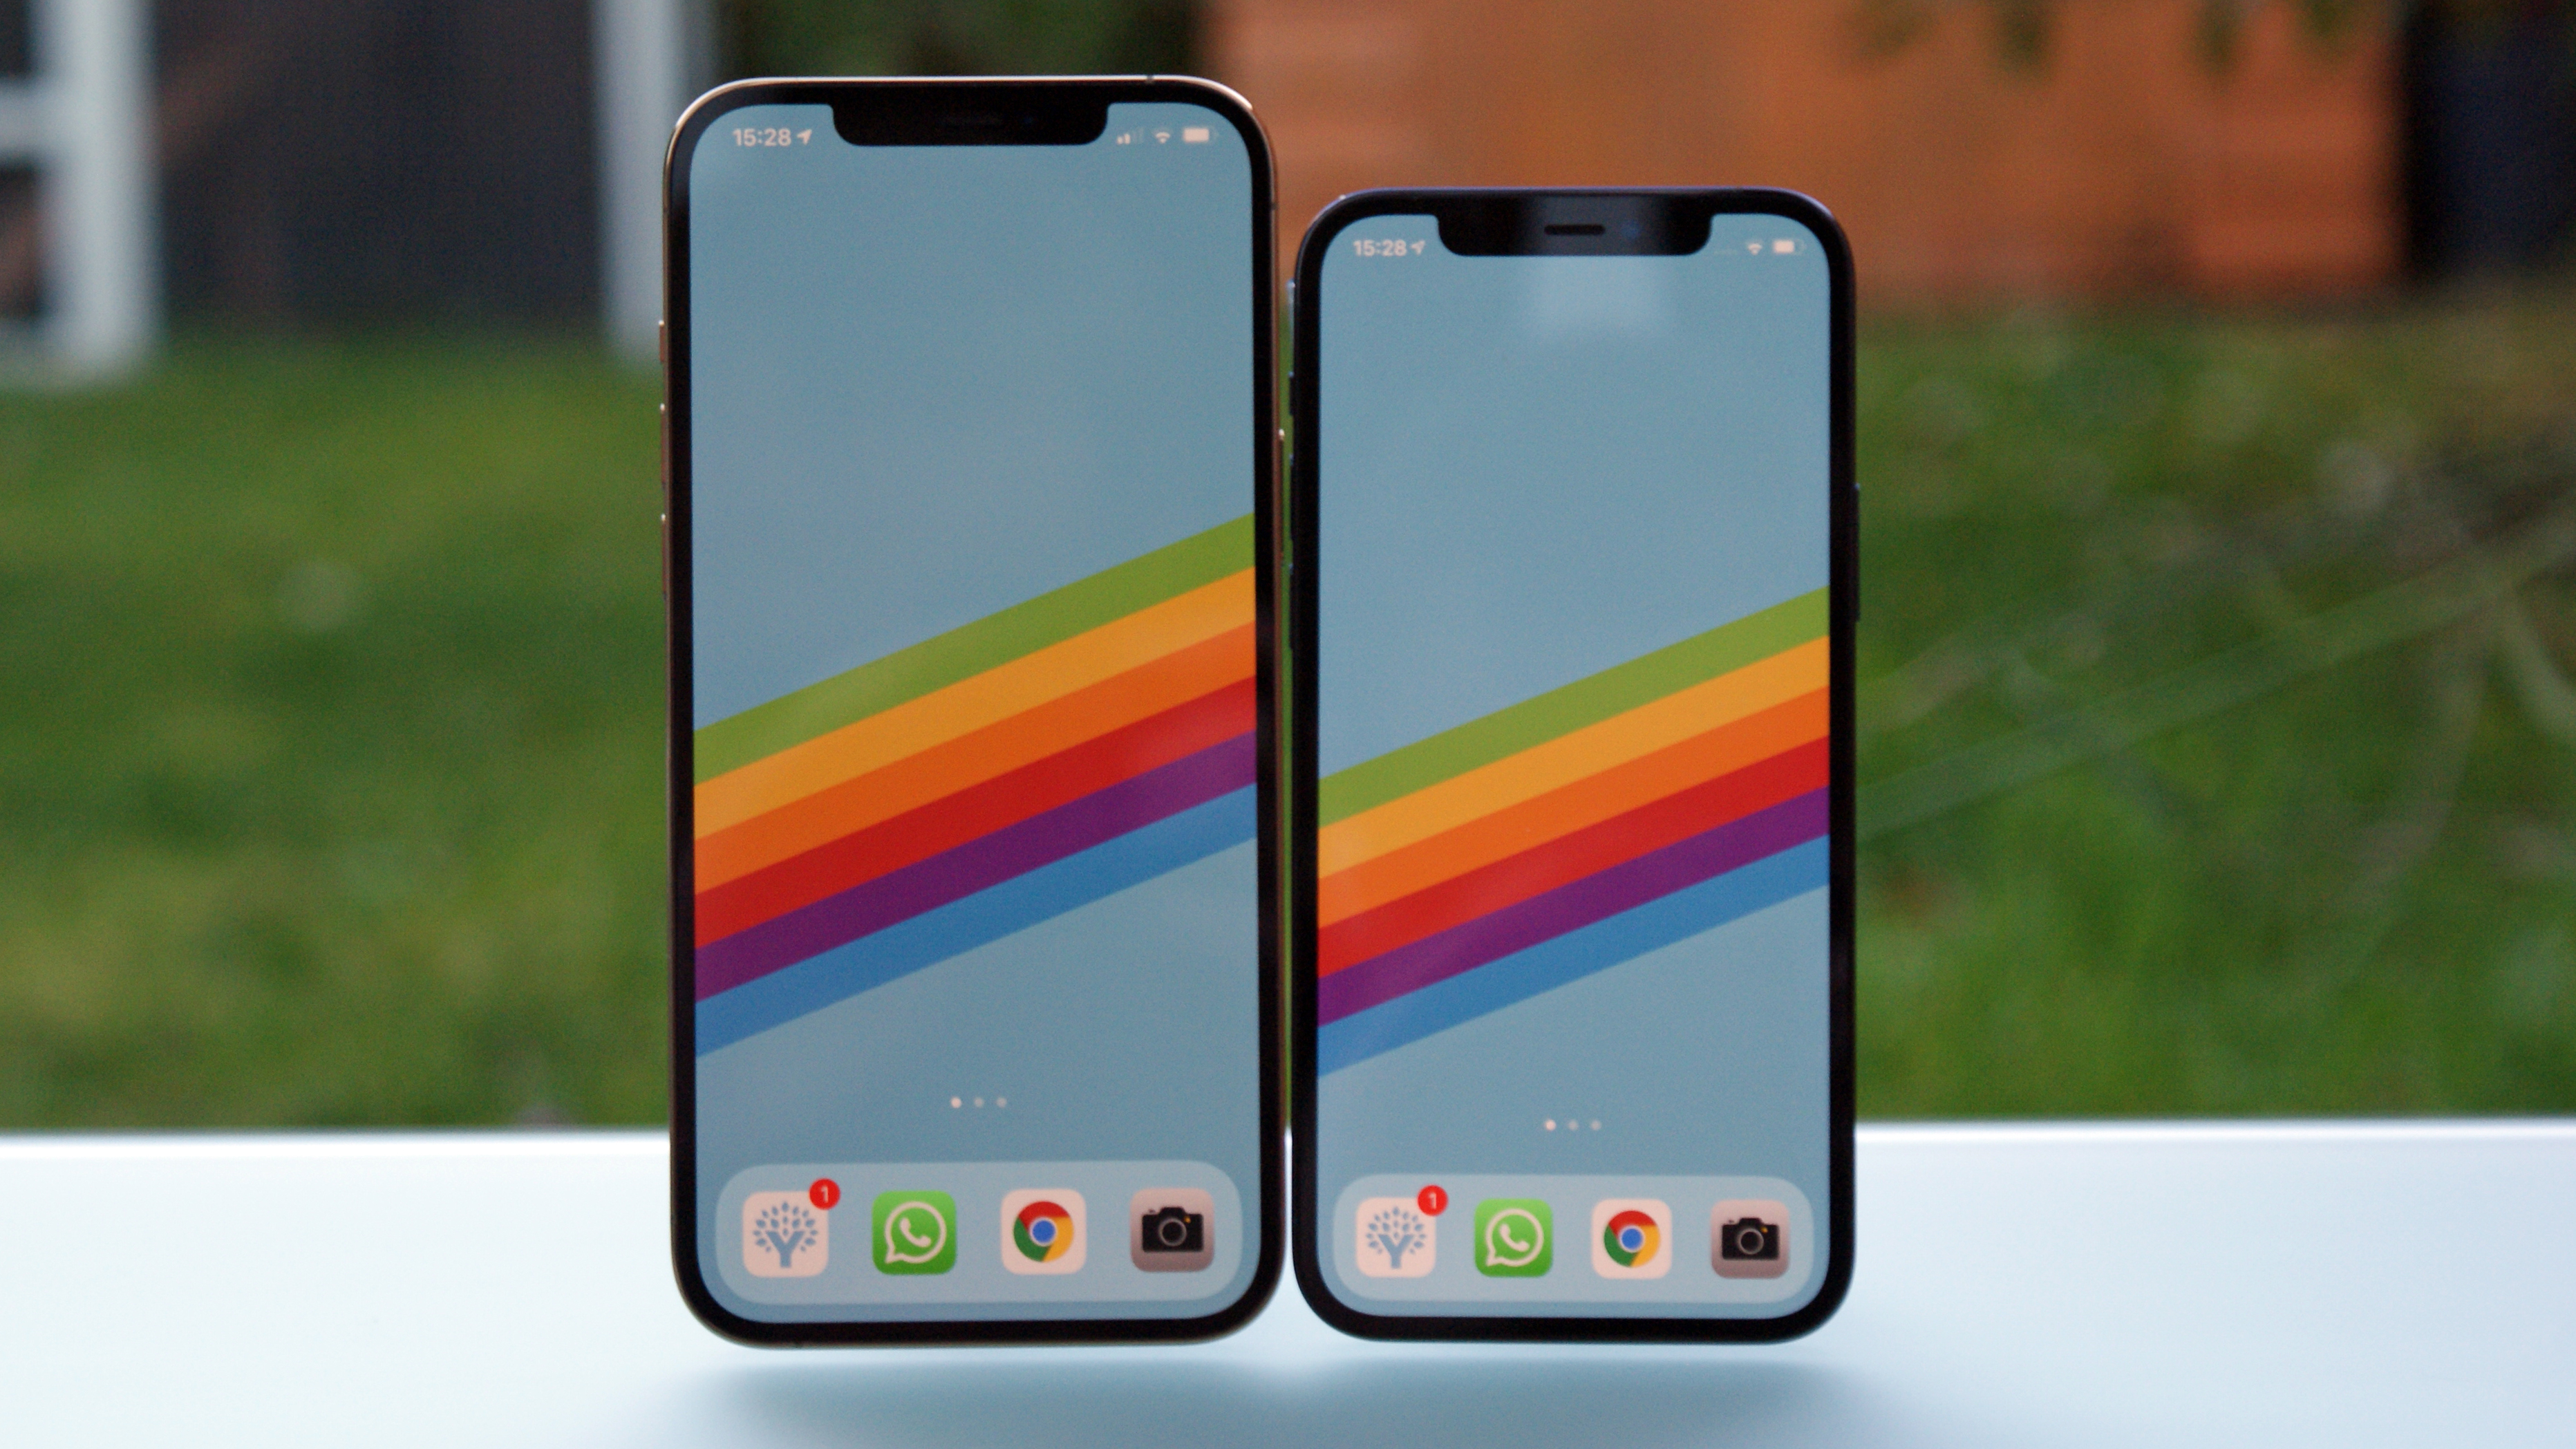 The iPhone 12 Pro Max and iPhone 12 Pro